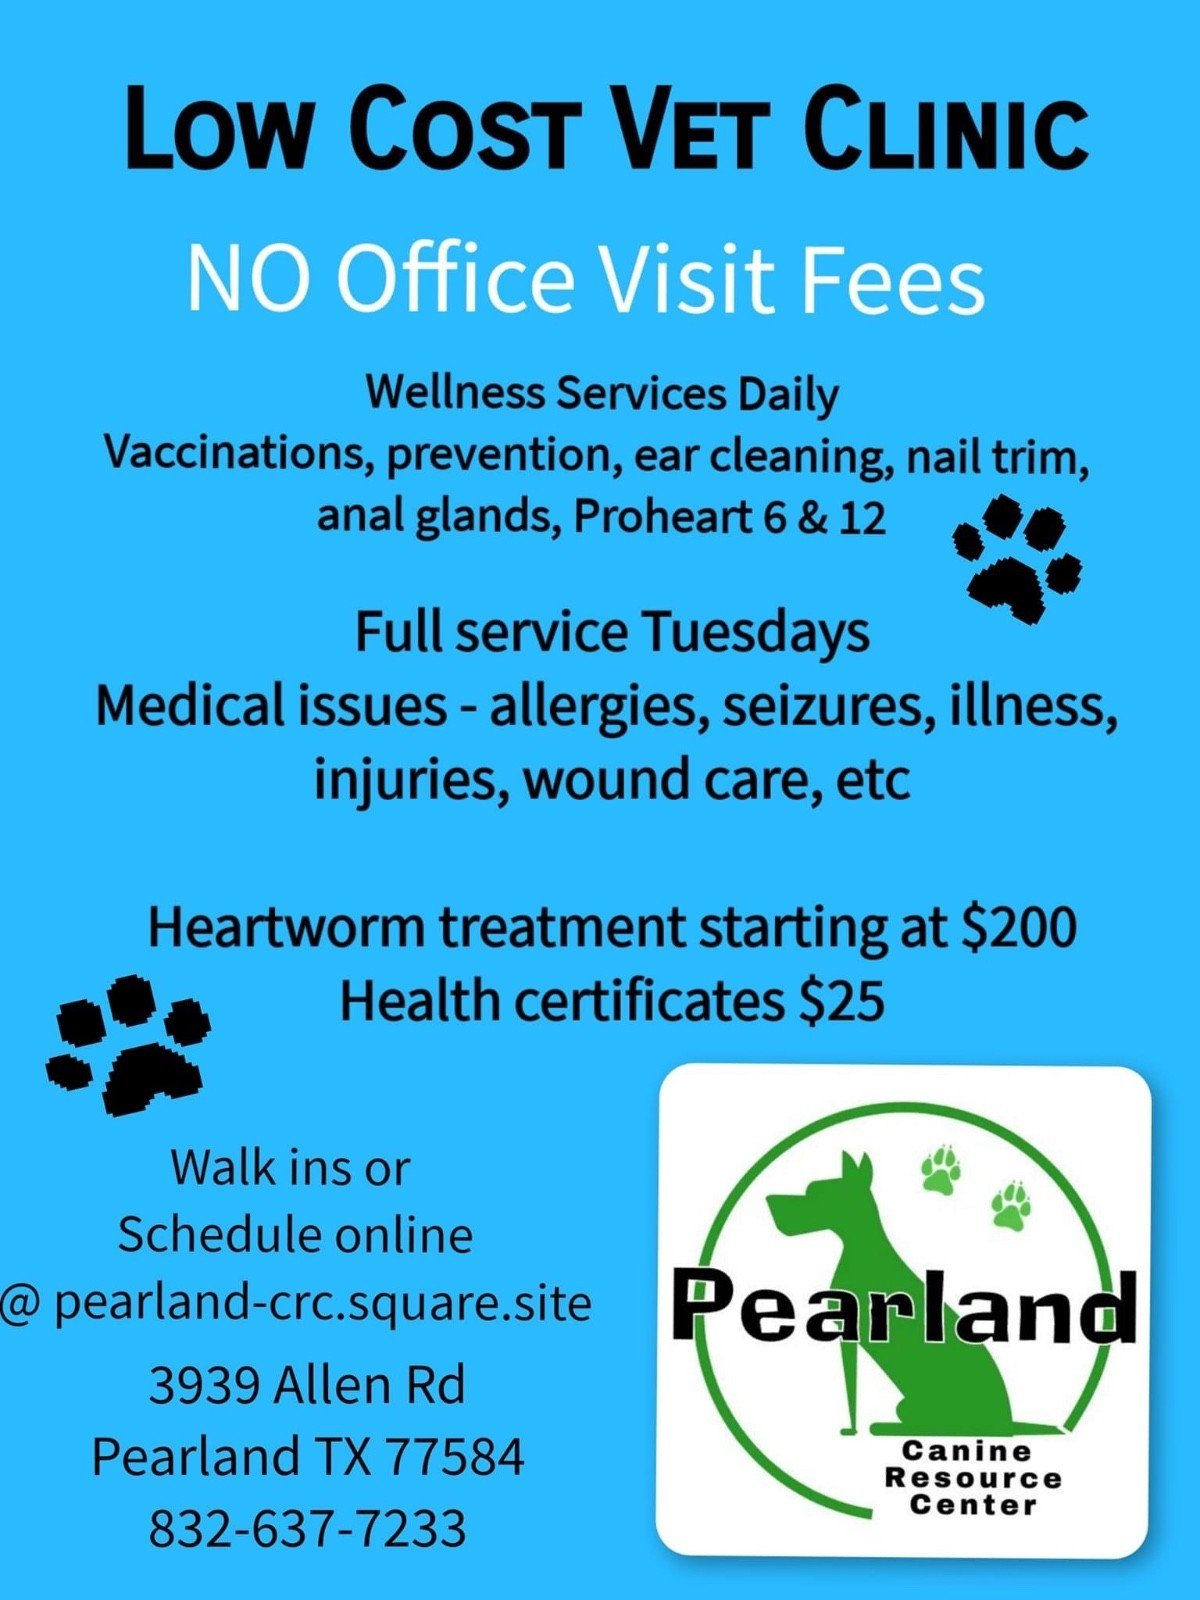 Low Cost Vet Clinic in Pearland!